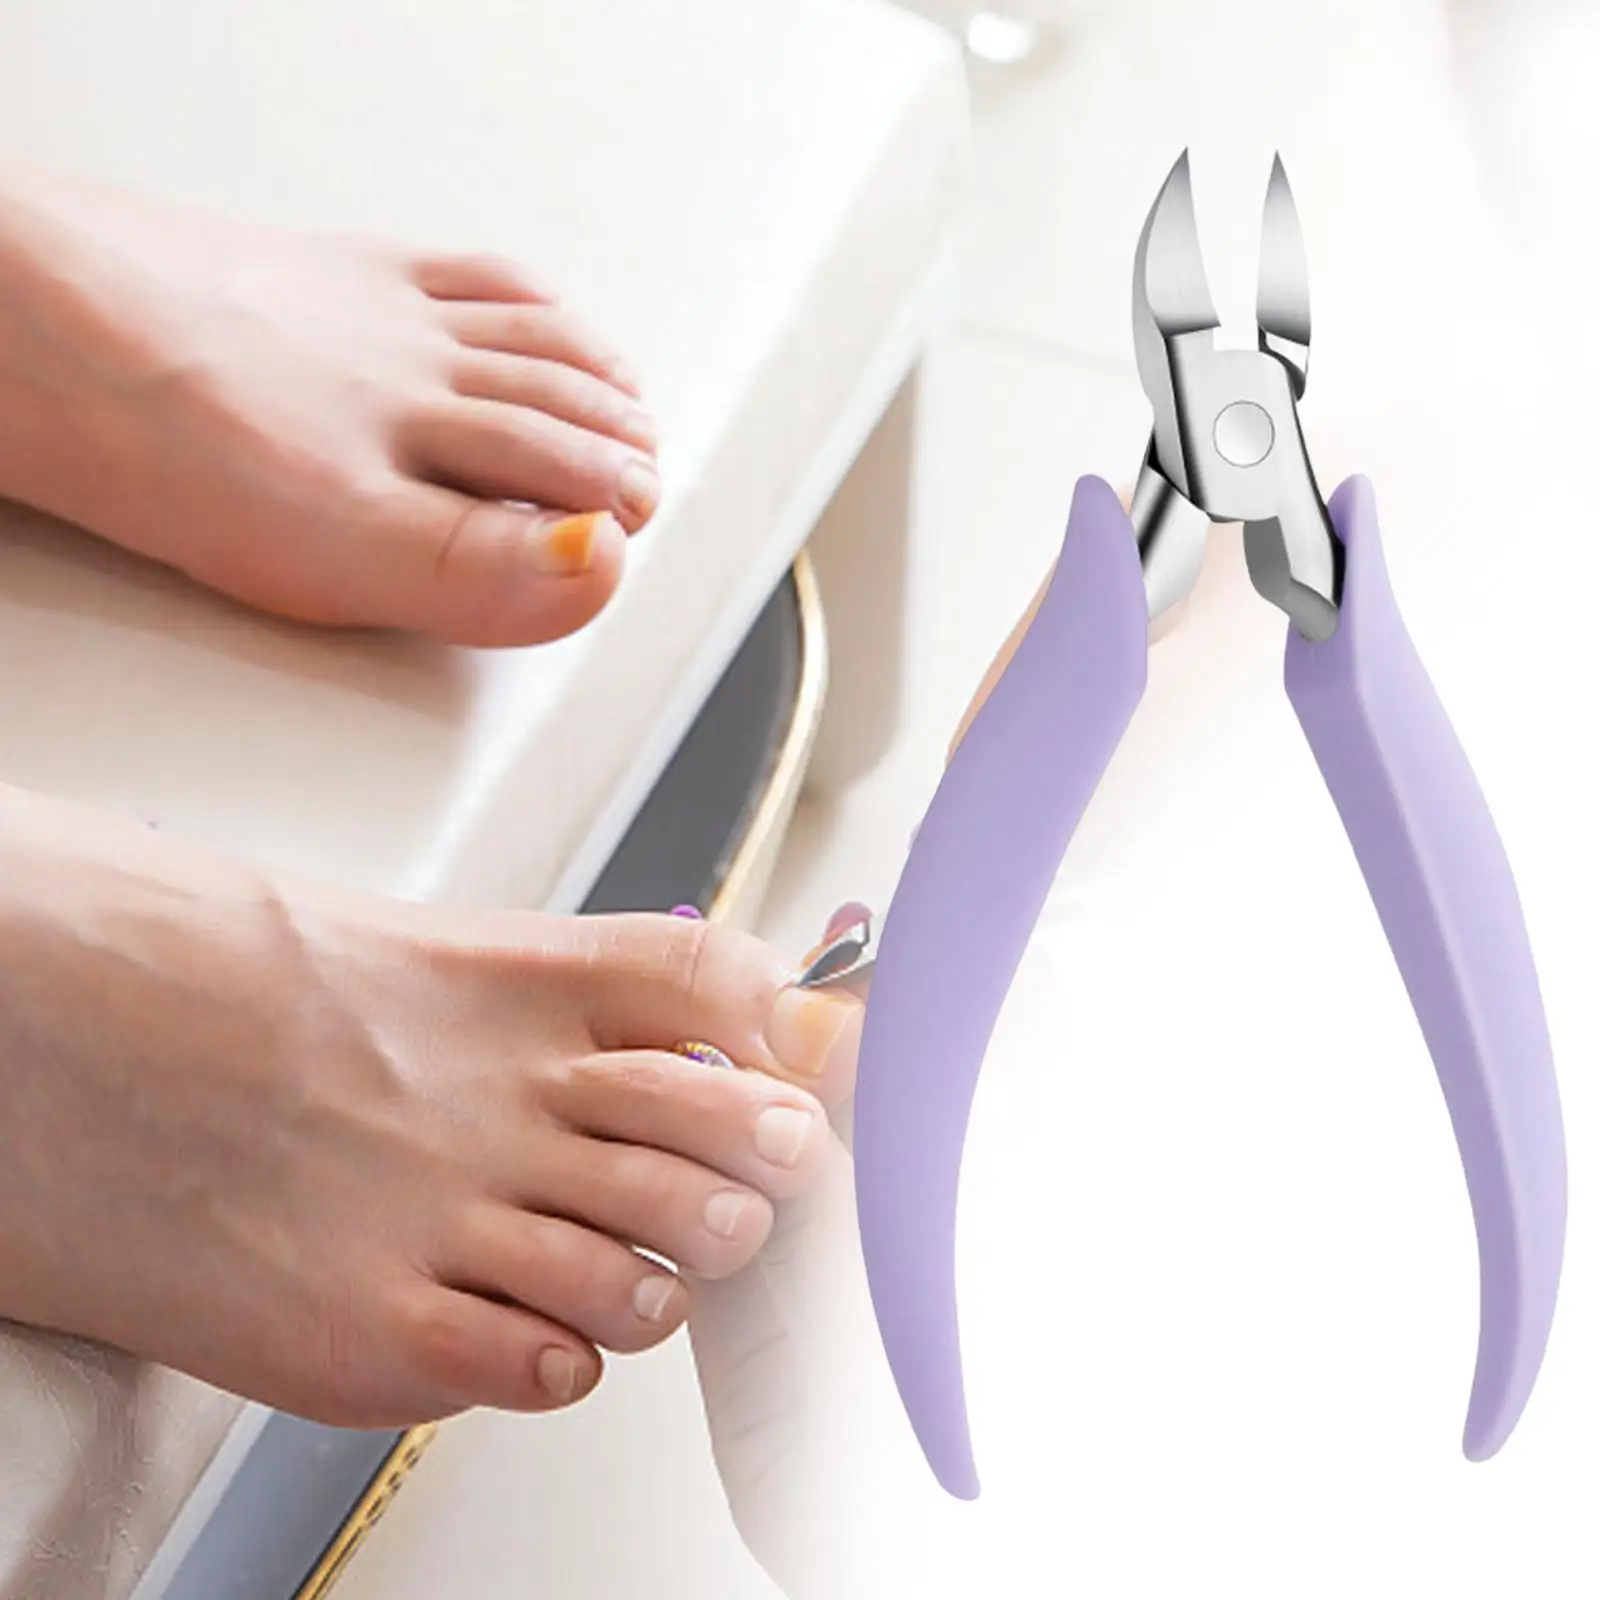 Toe Nail Clipper Nail Cuticle Remover Tool for Home Users or Beauty Salon